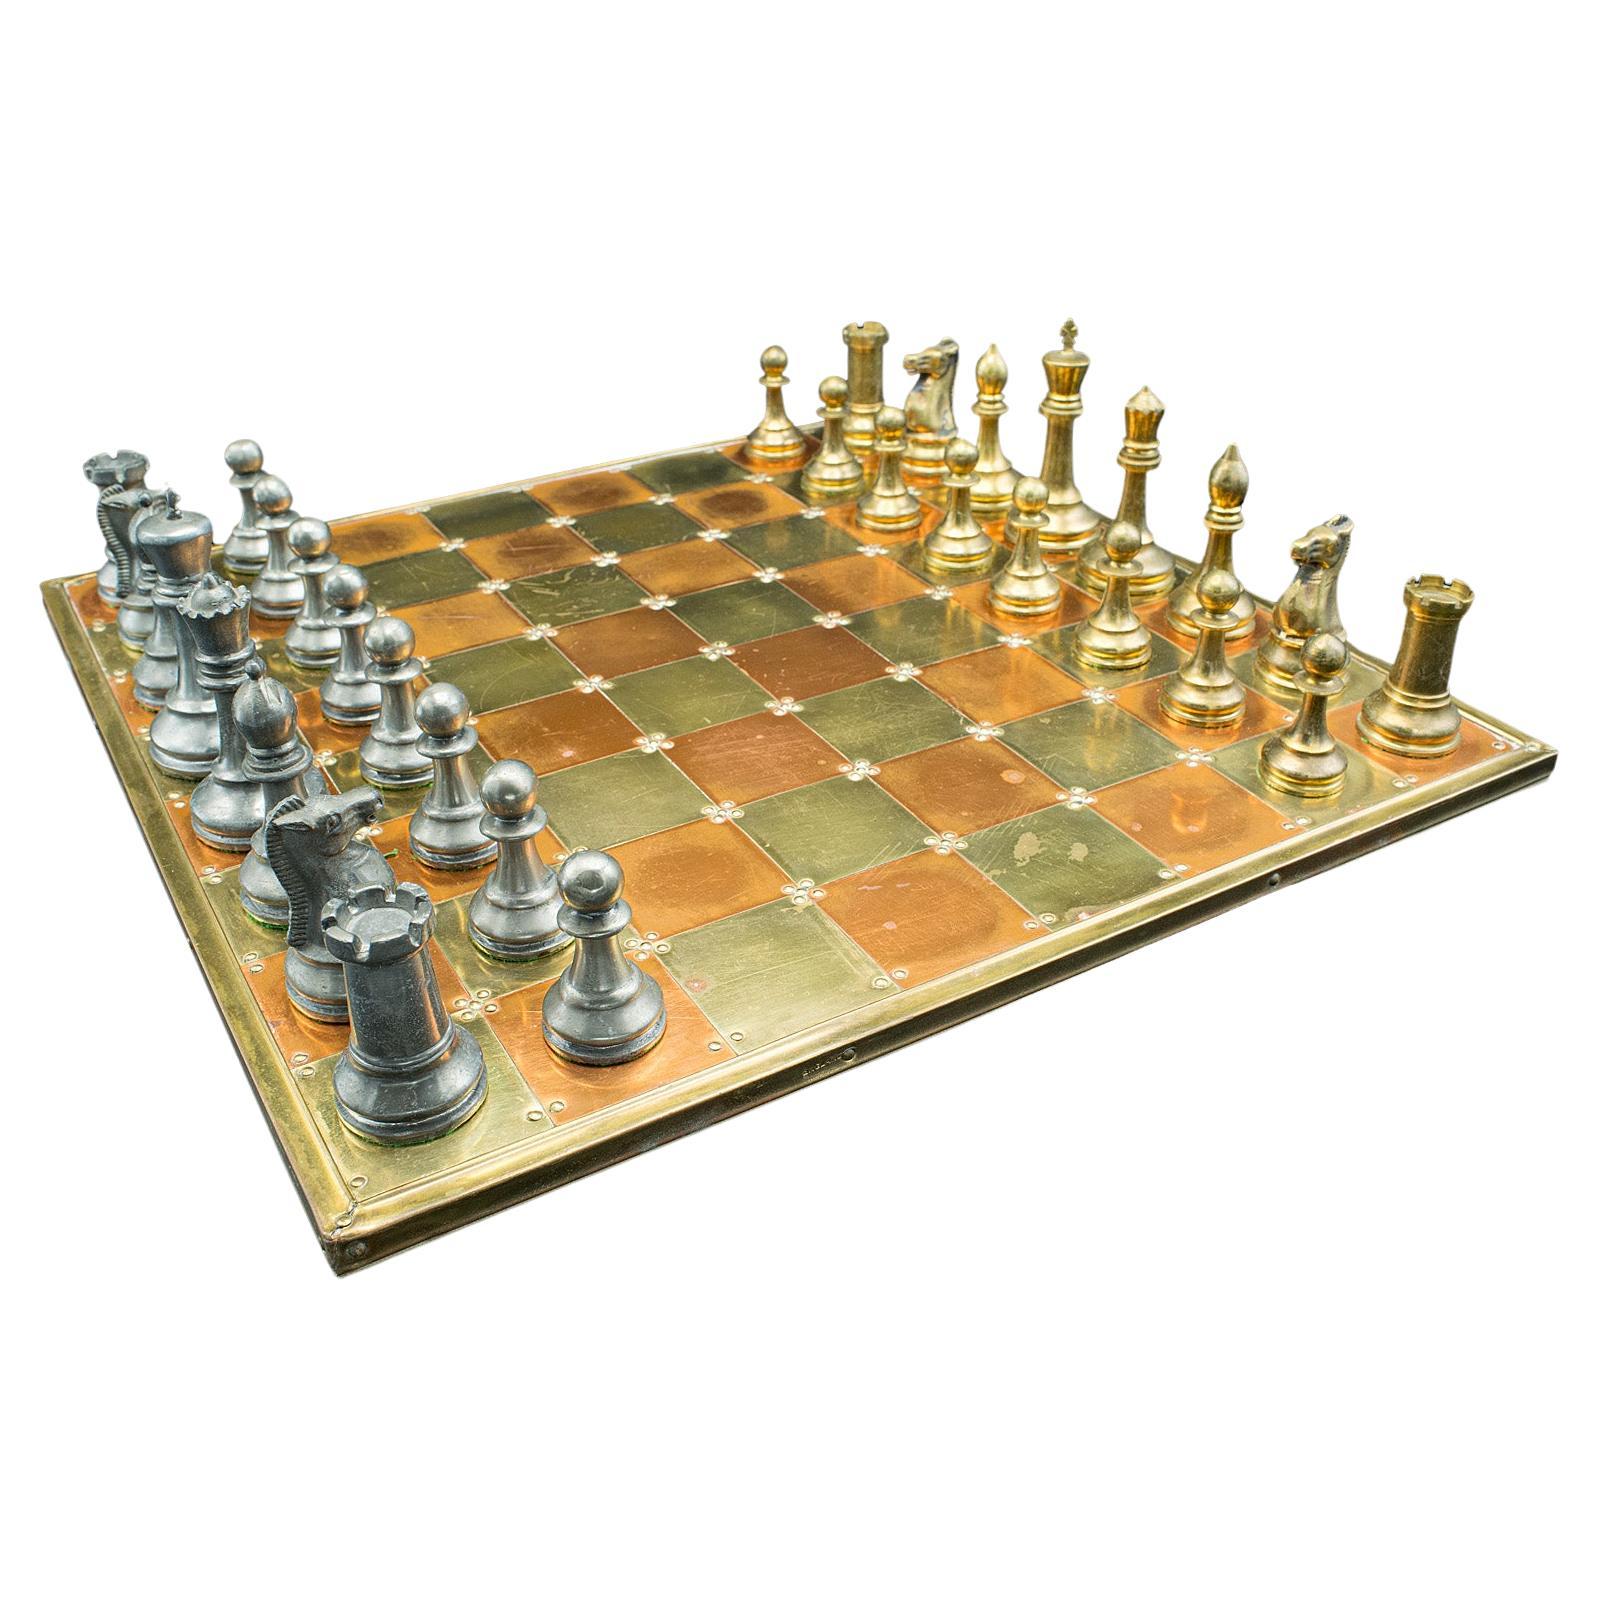 Large Vintage Chess Board, English, Brass, Copper, Gaming Set, Late 20th Century For Sale